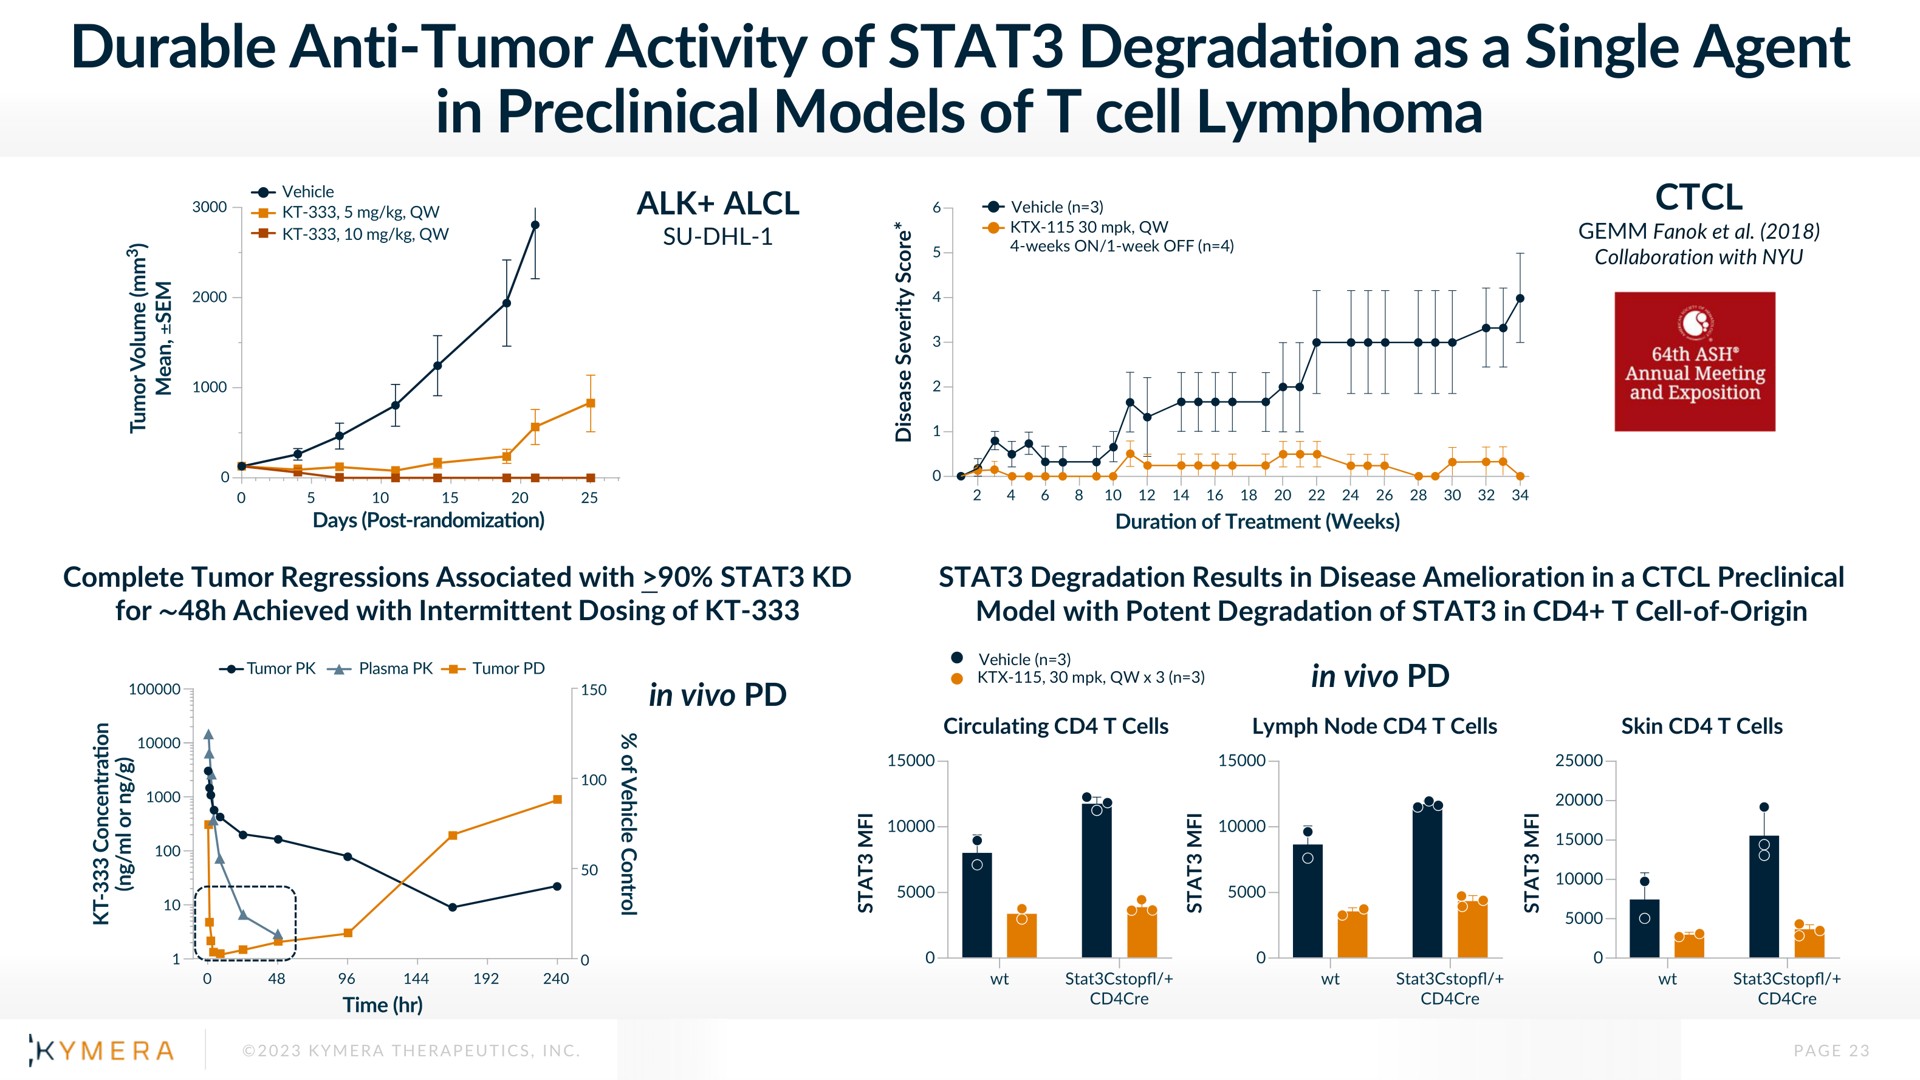 durable anti tumor activity of degradation as a single agent in preclinical models of cell lymphoma | Kymera